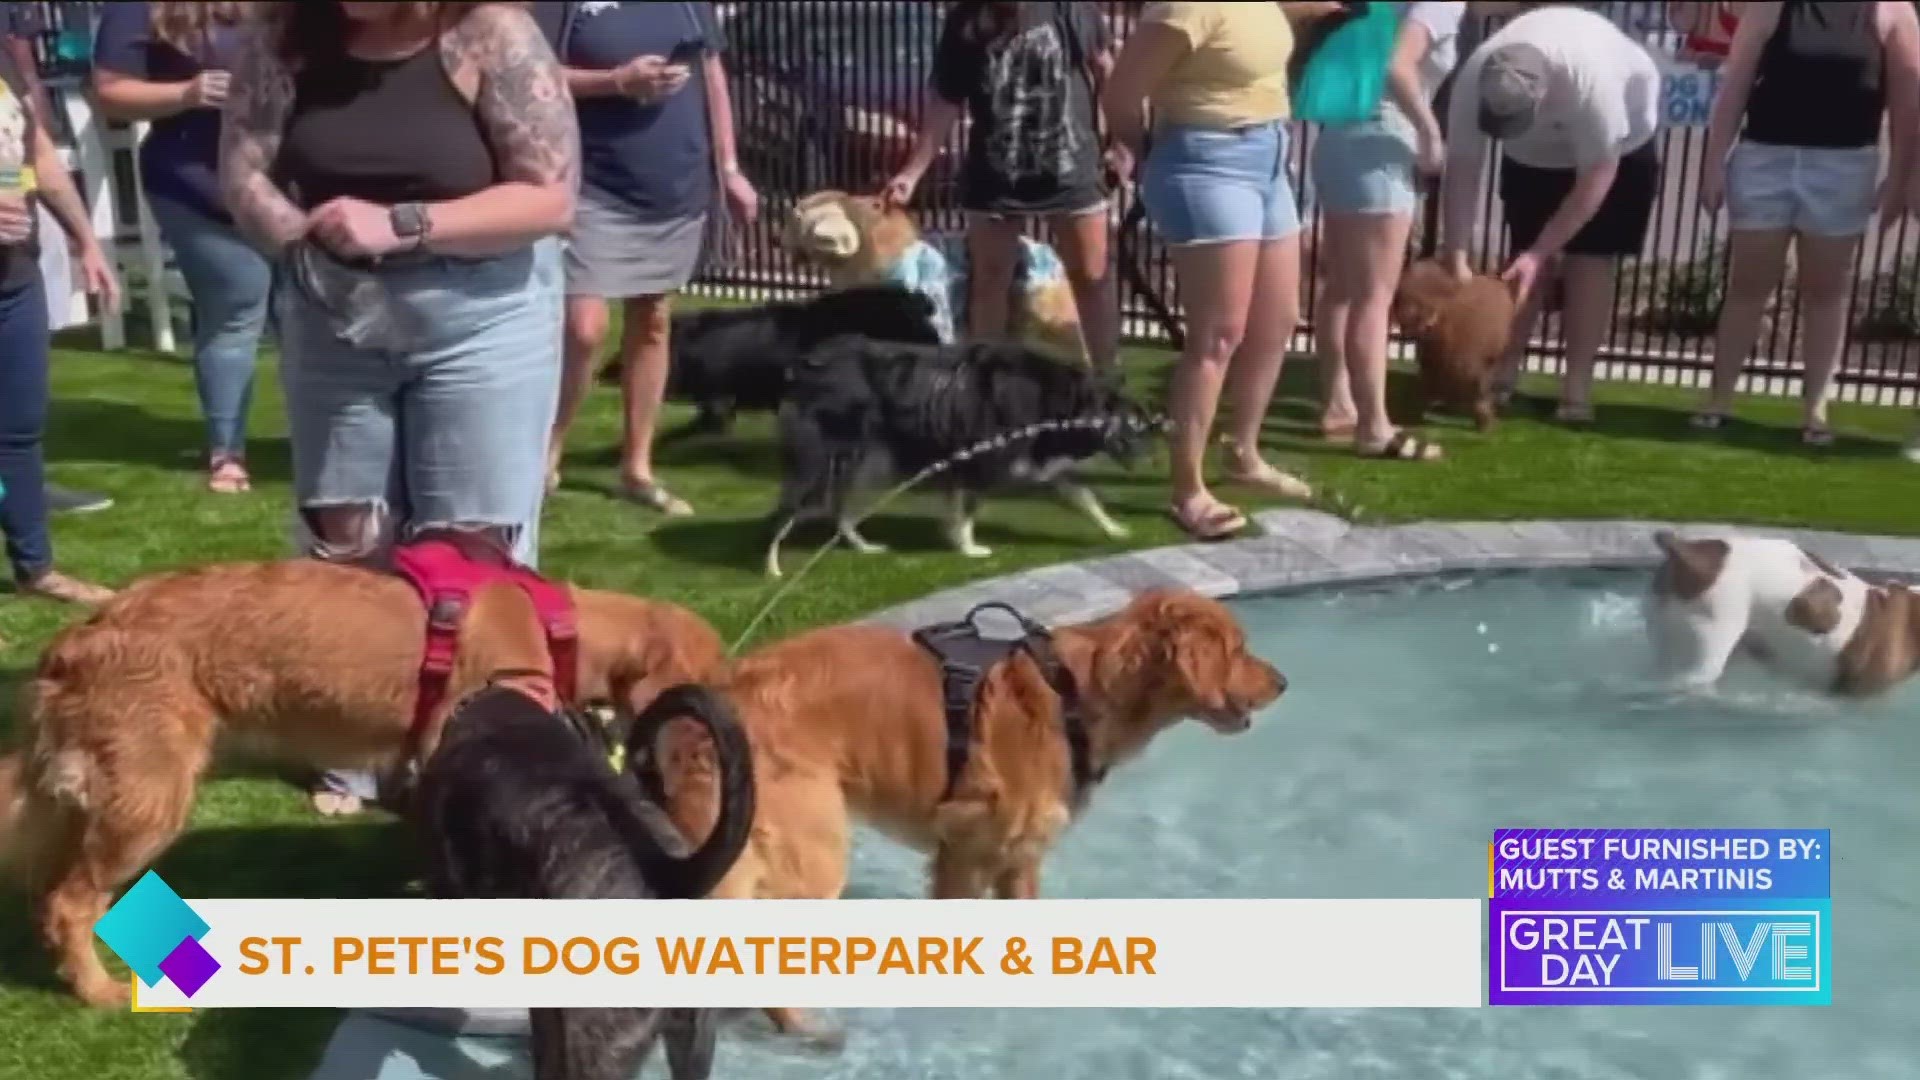 St. Pete’s first water park for dog’s and bar for their owners is now open. The owner of Mutt’s and Martini’s shares her inspiration for creating the new concept.